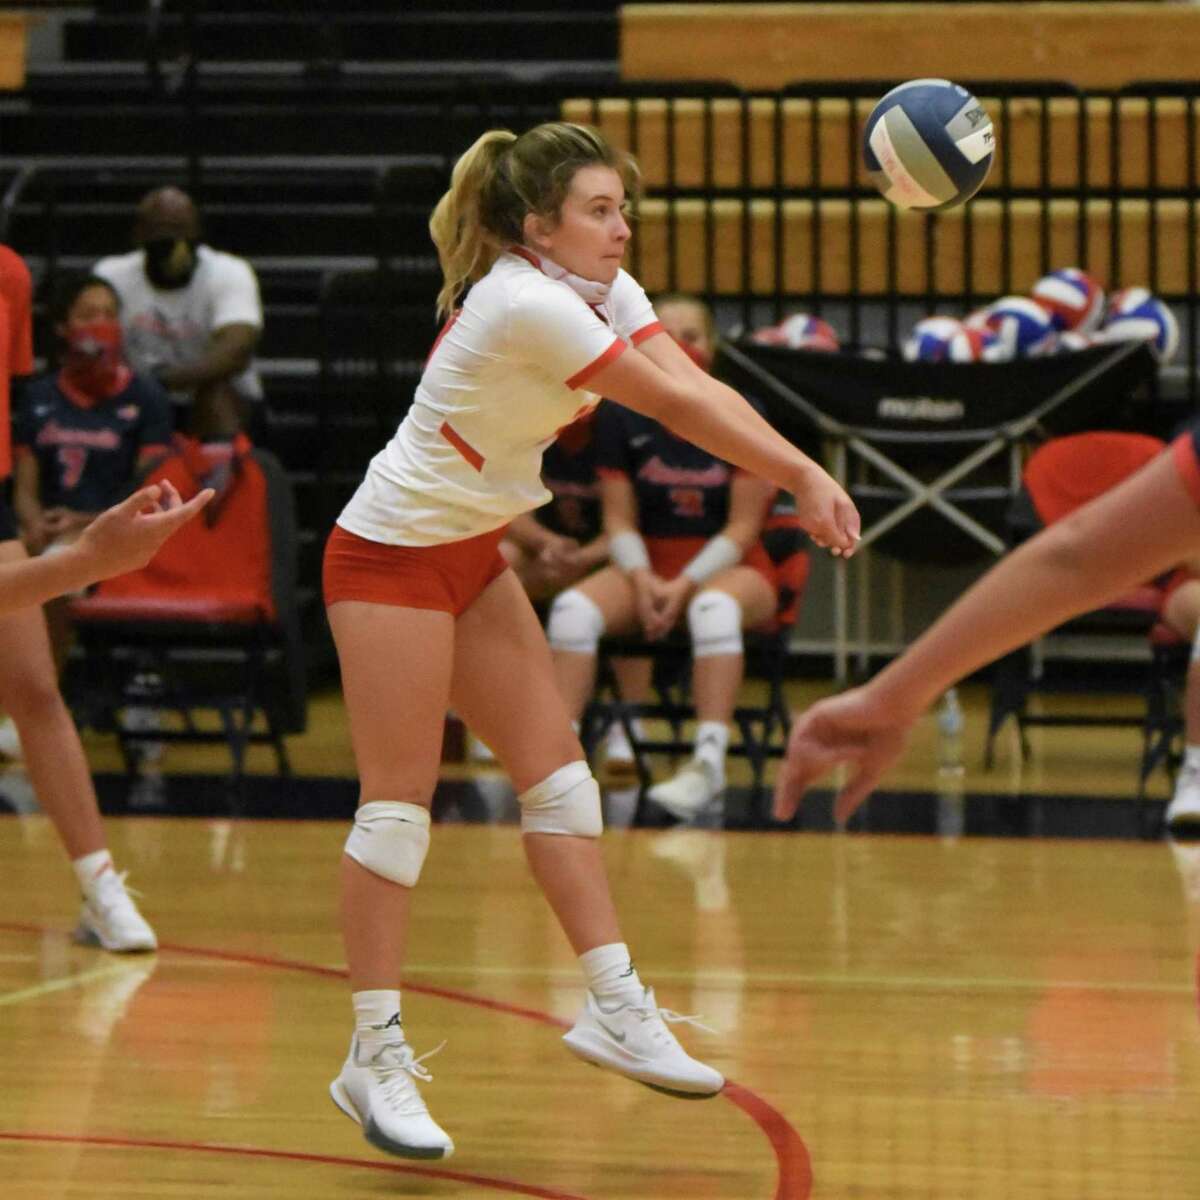 Atascocita junior libero Kayden Tanner prepares for a dig during the Lady Eagles' season opener against Jersey Village.